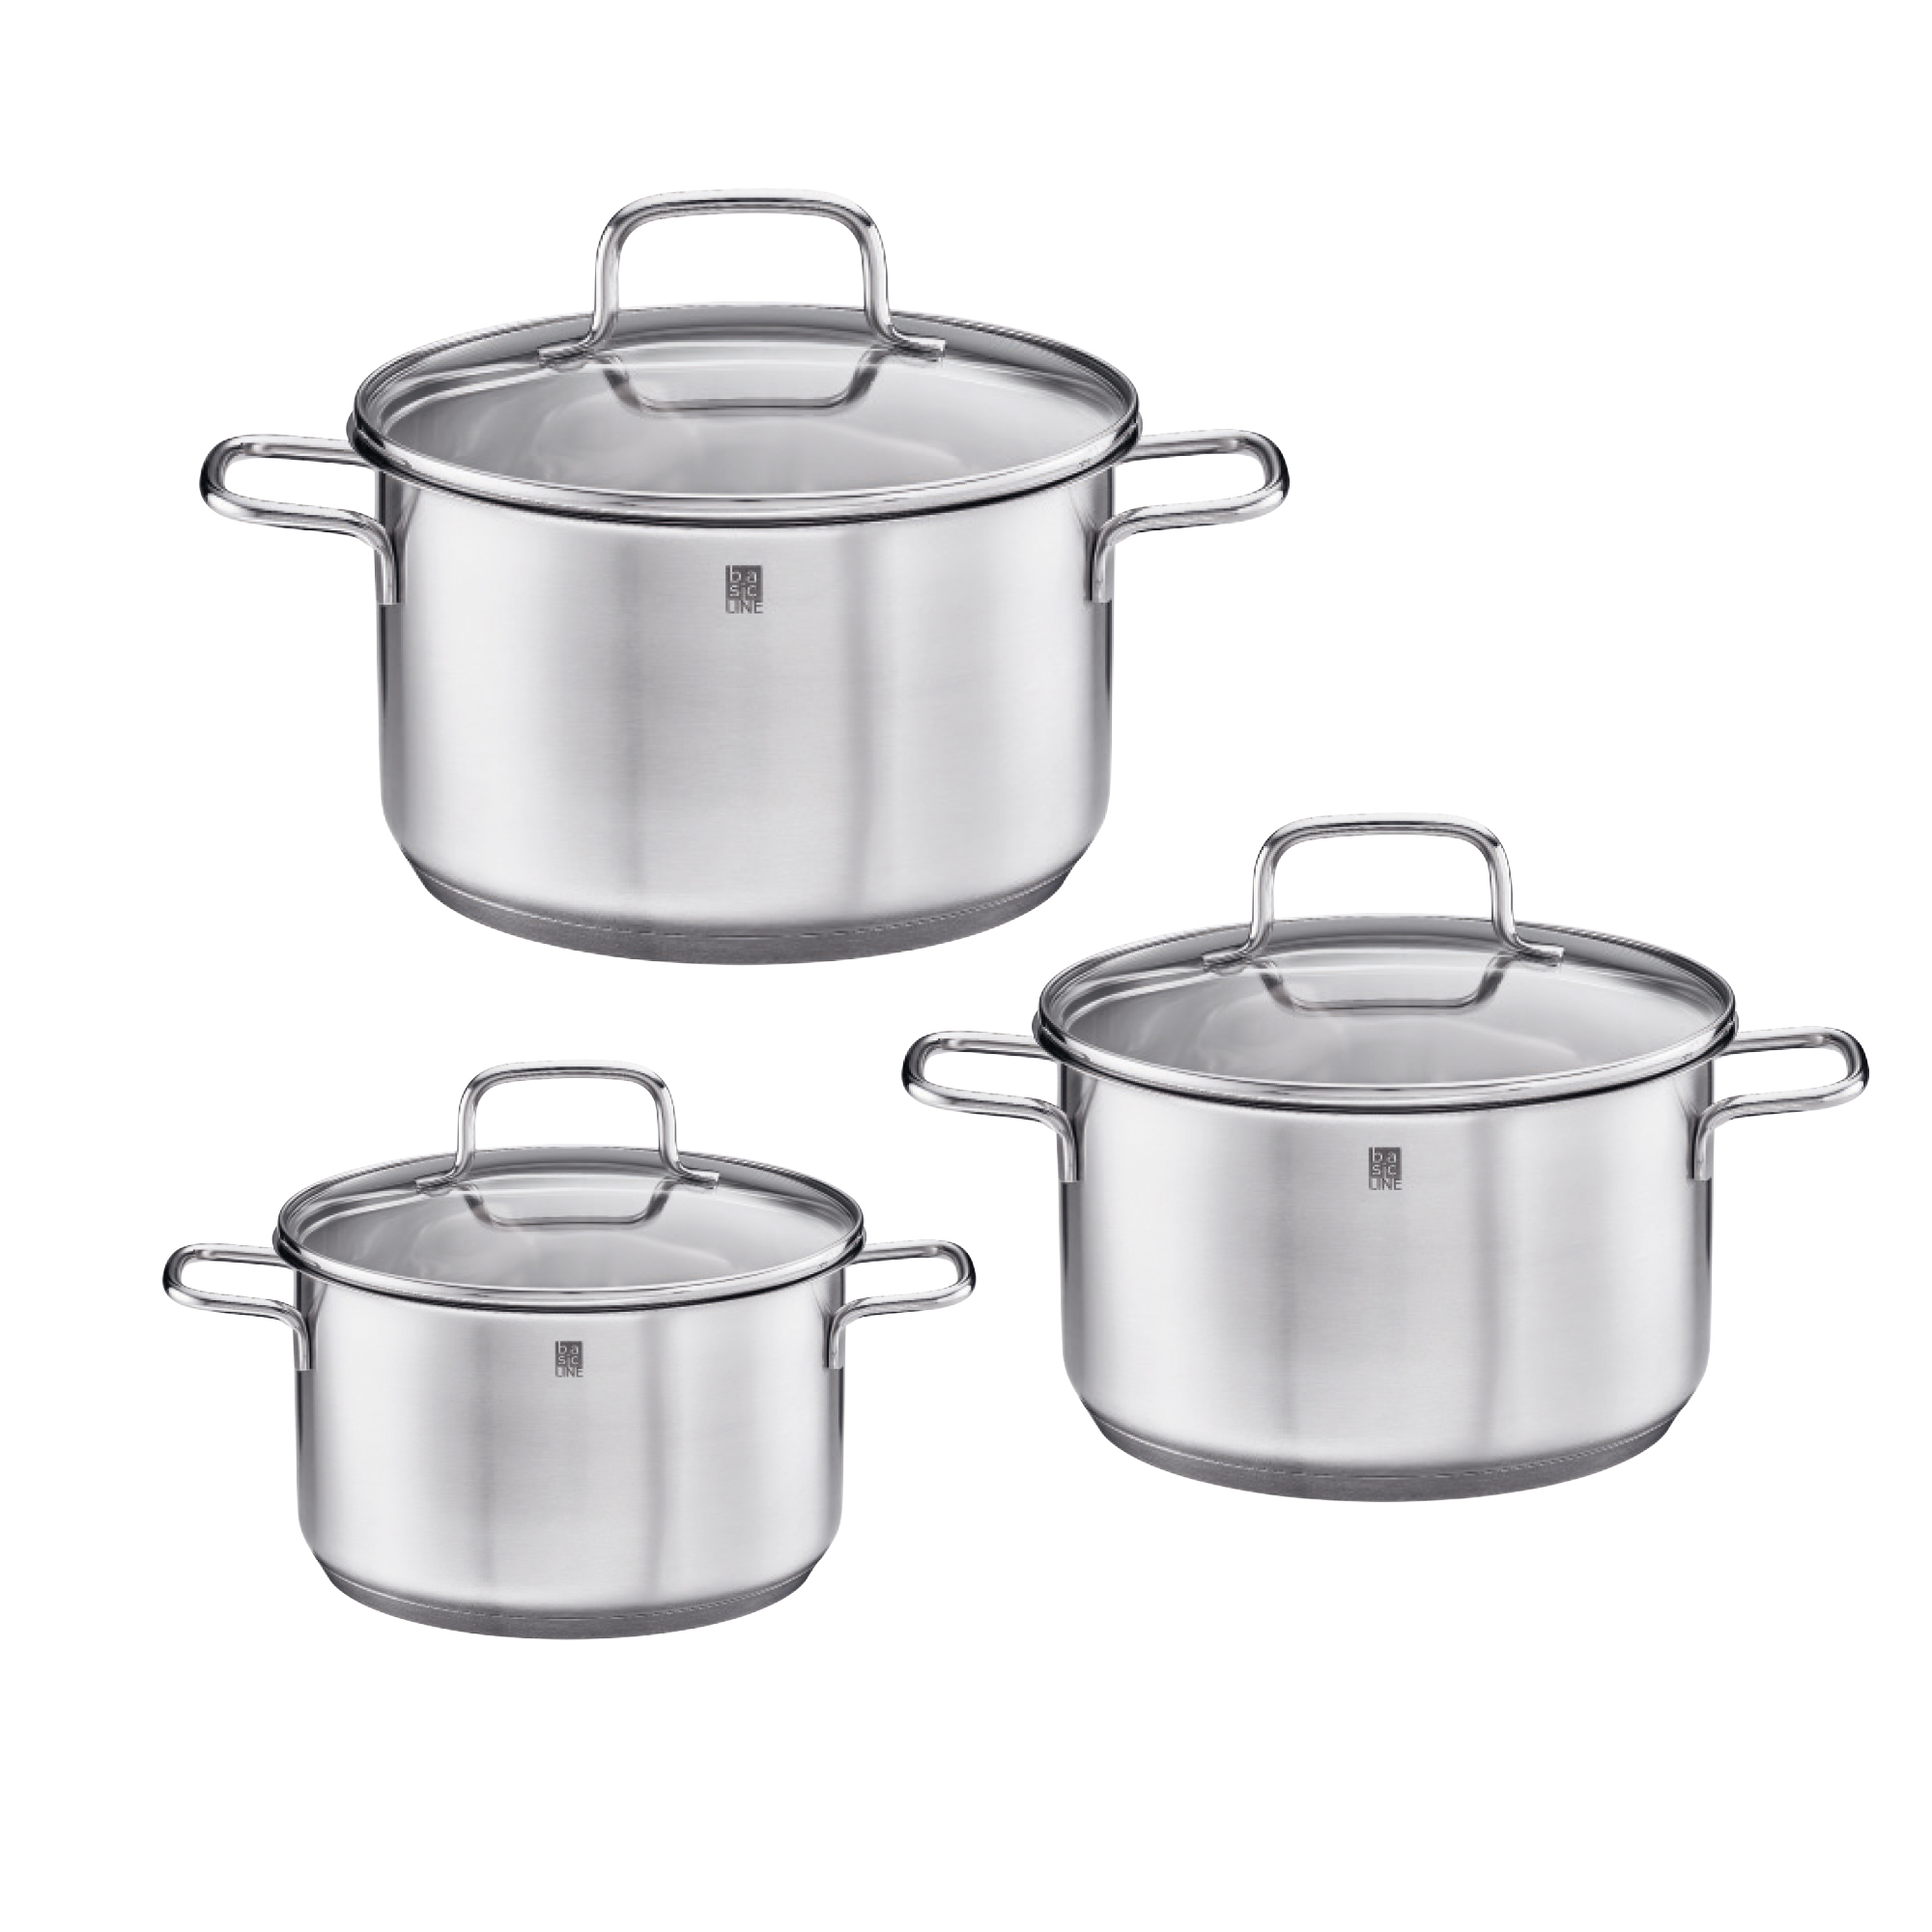 2.0 L Double Handle Sauce Pan Rosle 18/10 Stainless Steel 16 cm 